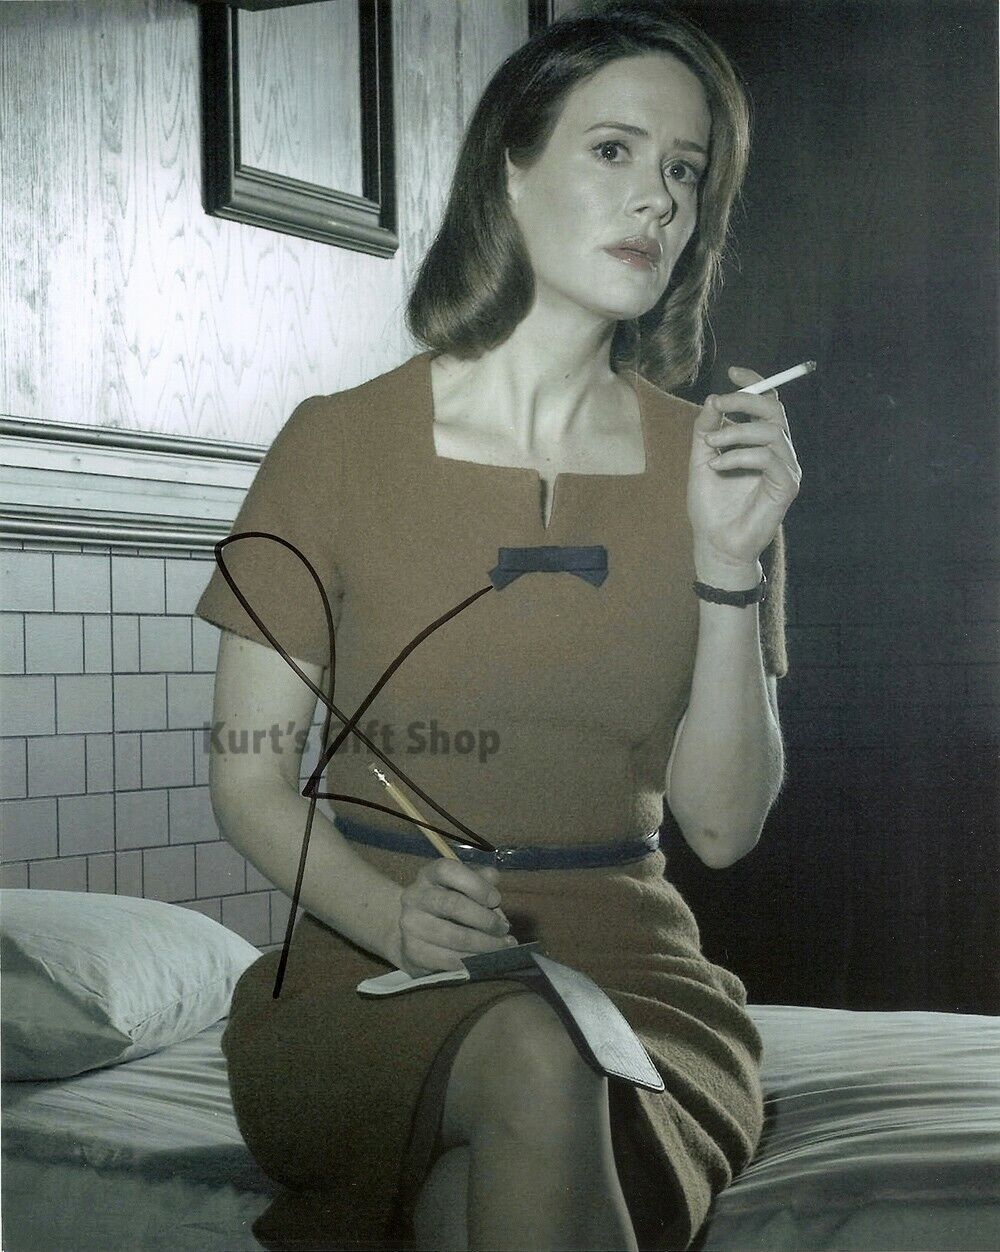 Sarah Paulson 8 x 10 Autographed / Signed Photo Poster painting American Horror Story Reprint 1